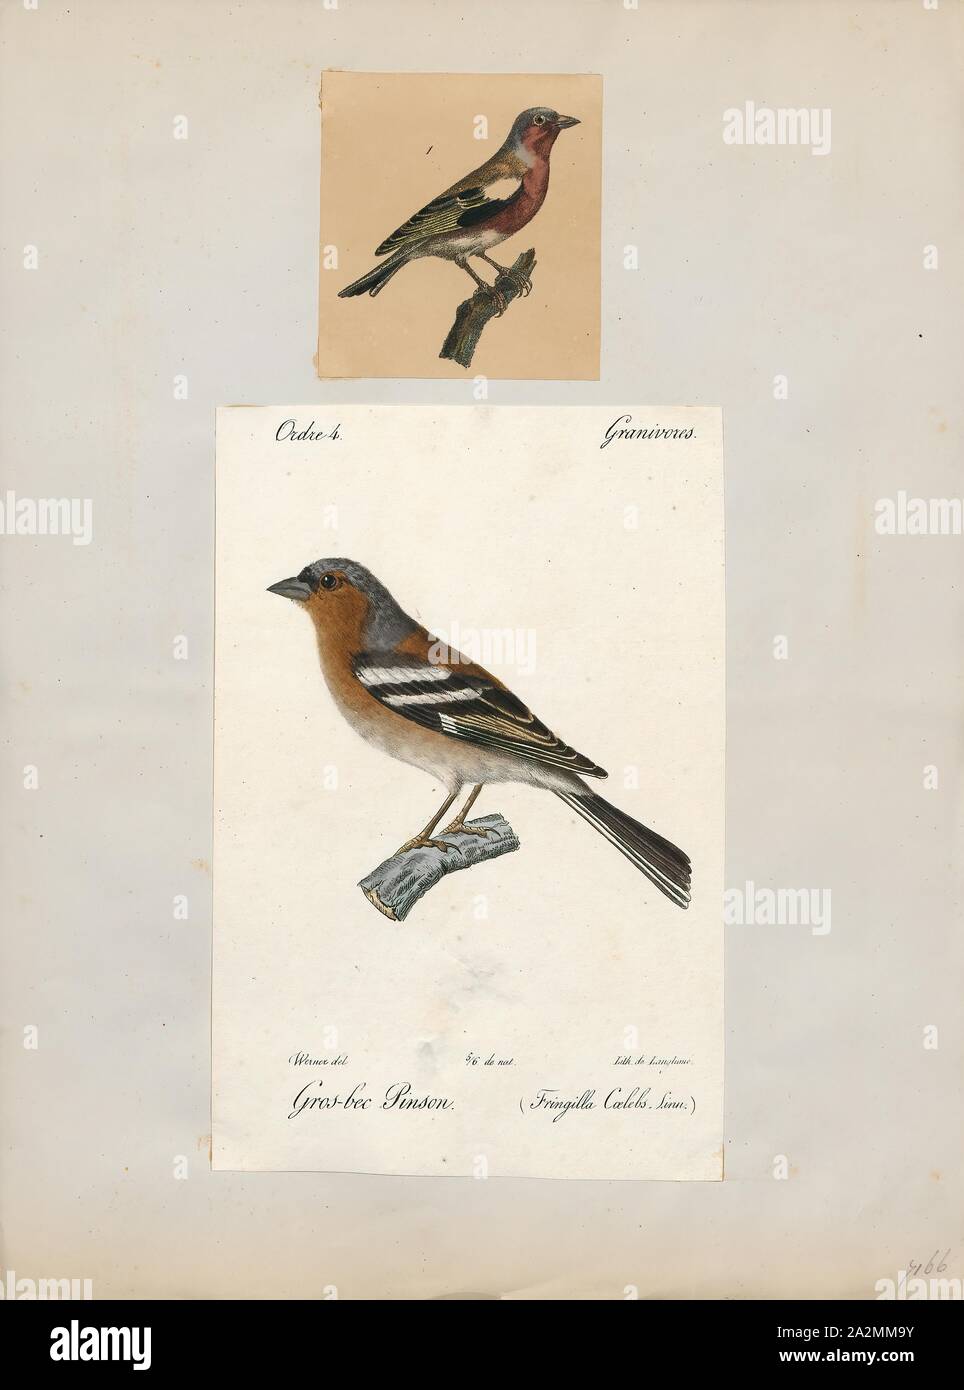 Fringilla coelebs, Print, The common chaffinch (Fringilla coelebs), usually known simply as the chaffinch, is a common and widespread small passerine bird in the finch family. The male is brightly coloured with a blue-grey cap and rust-red underparts. The female is much duller in colouring, but both sexes have two contrasting white wing bars and white sides to the tail. The male bird has a strong voice and sings from exposed perches to attract a mate., 1700-1880 Stock Photo